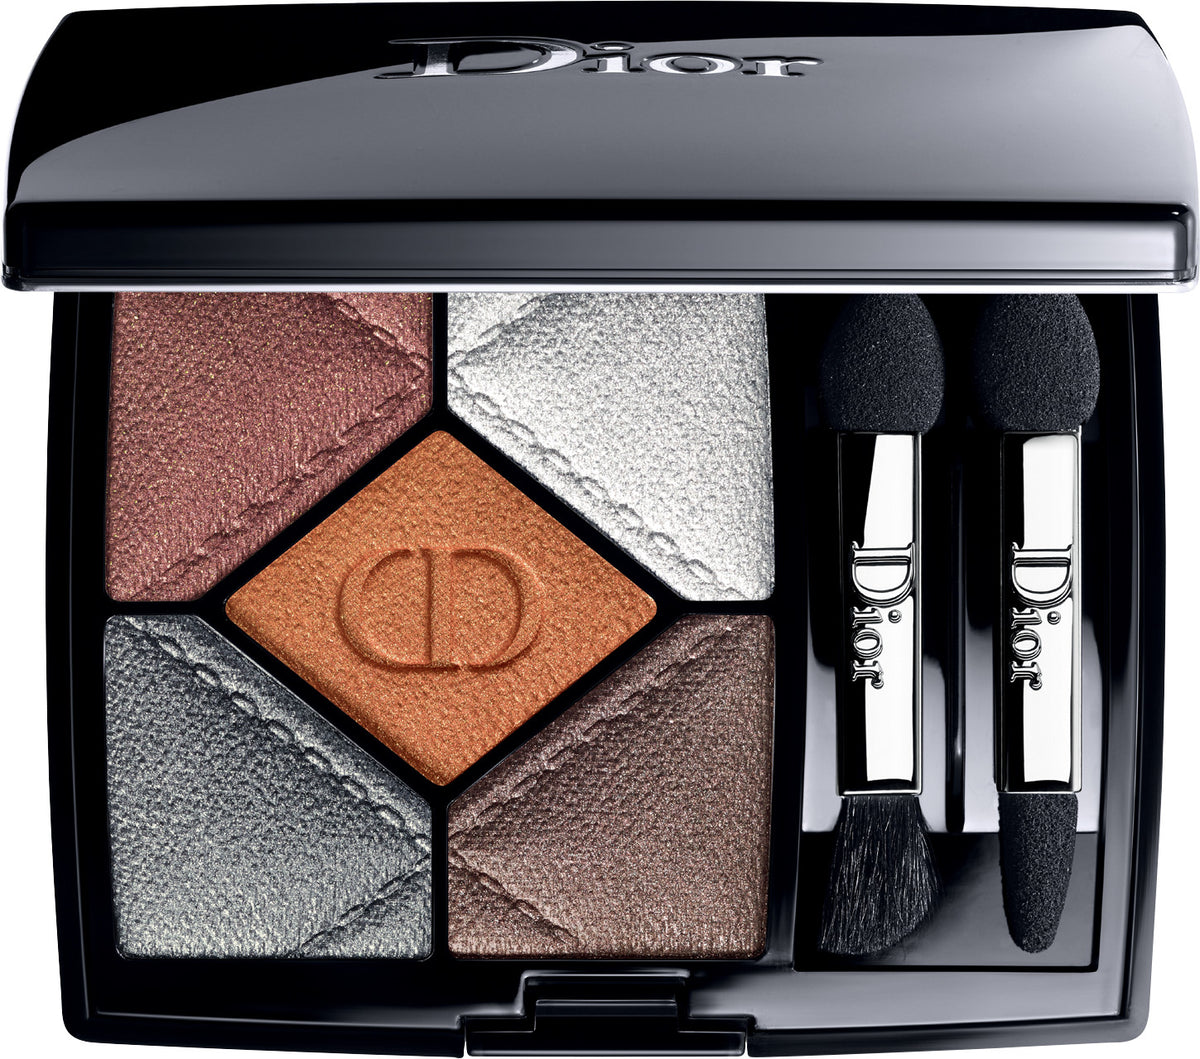 5 Colors Iconic Dior Eyeshadow Palette 